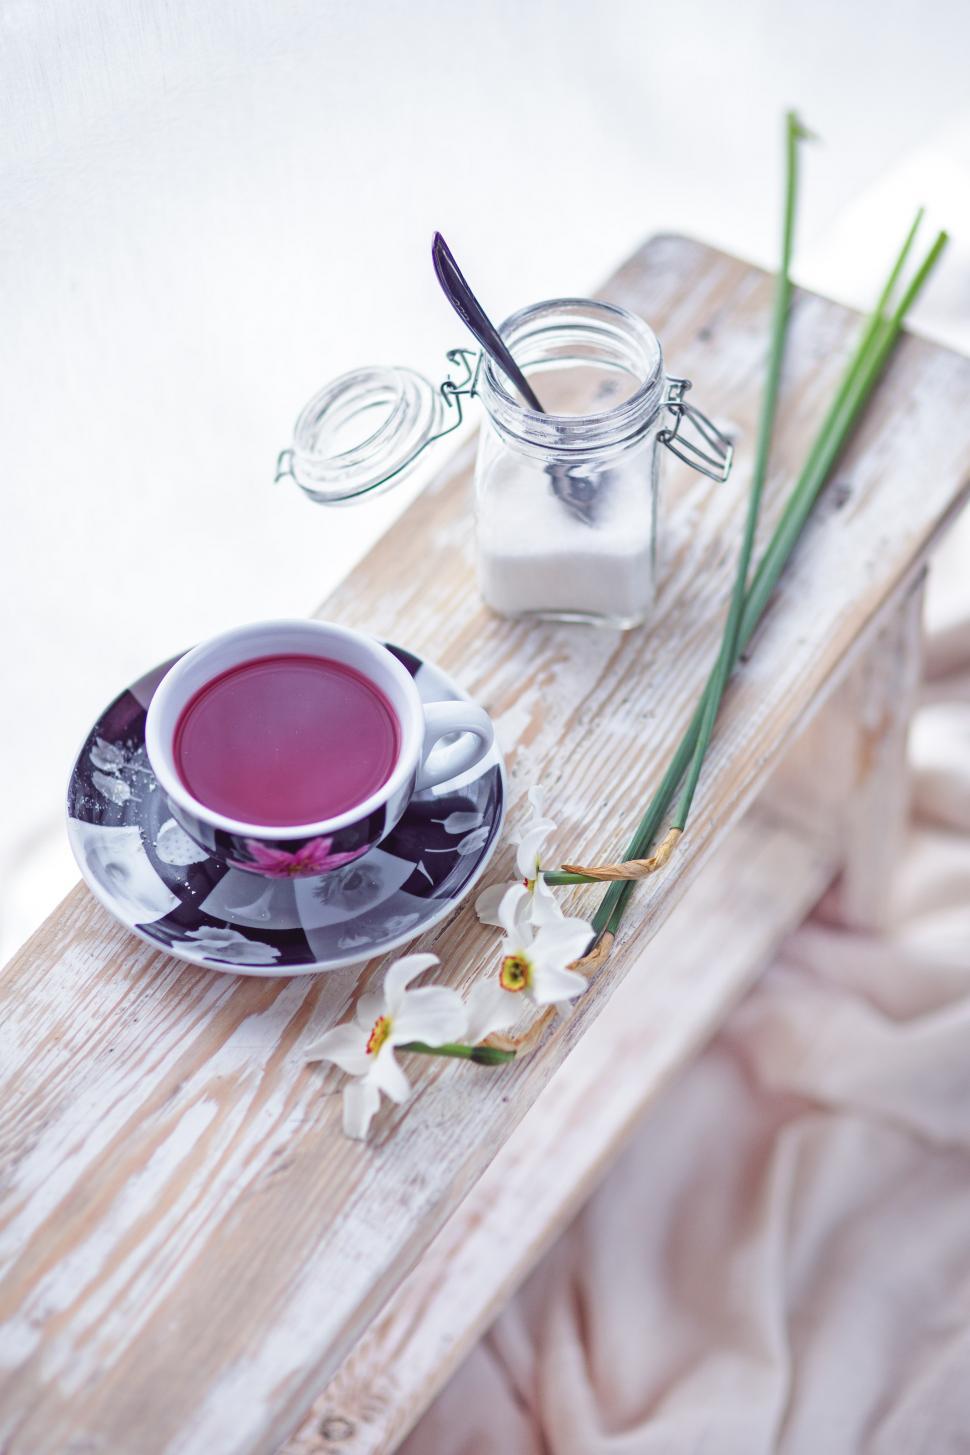 Free Image of Cup of Tea on Plate Next to Flowers 